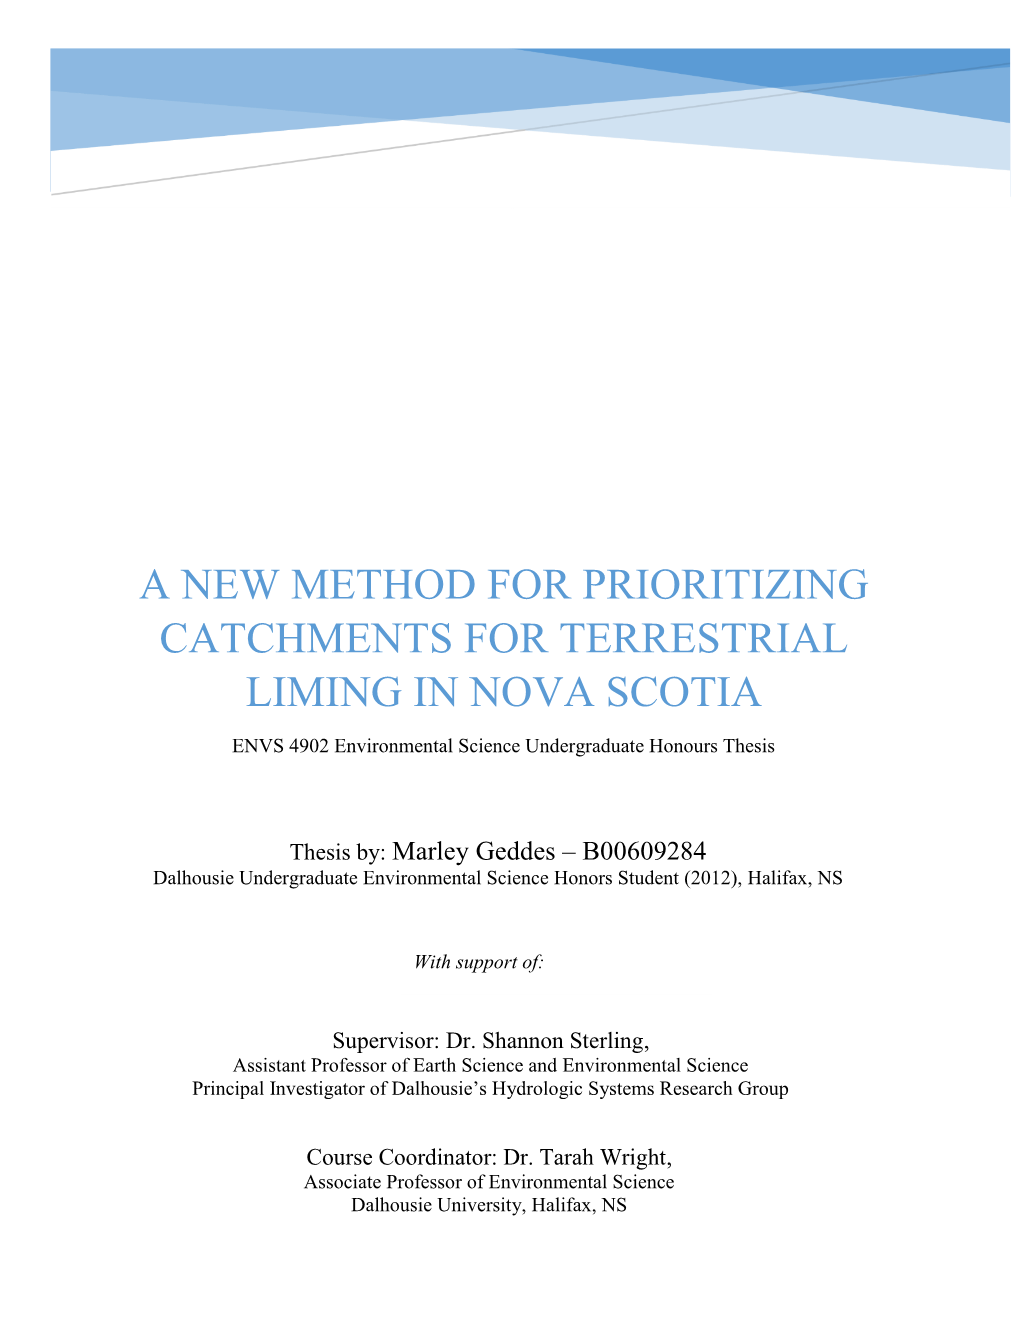 A New Method for Prioritizing Catchments for Terrestrial Liming in Nova Scotia